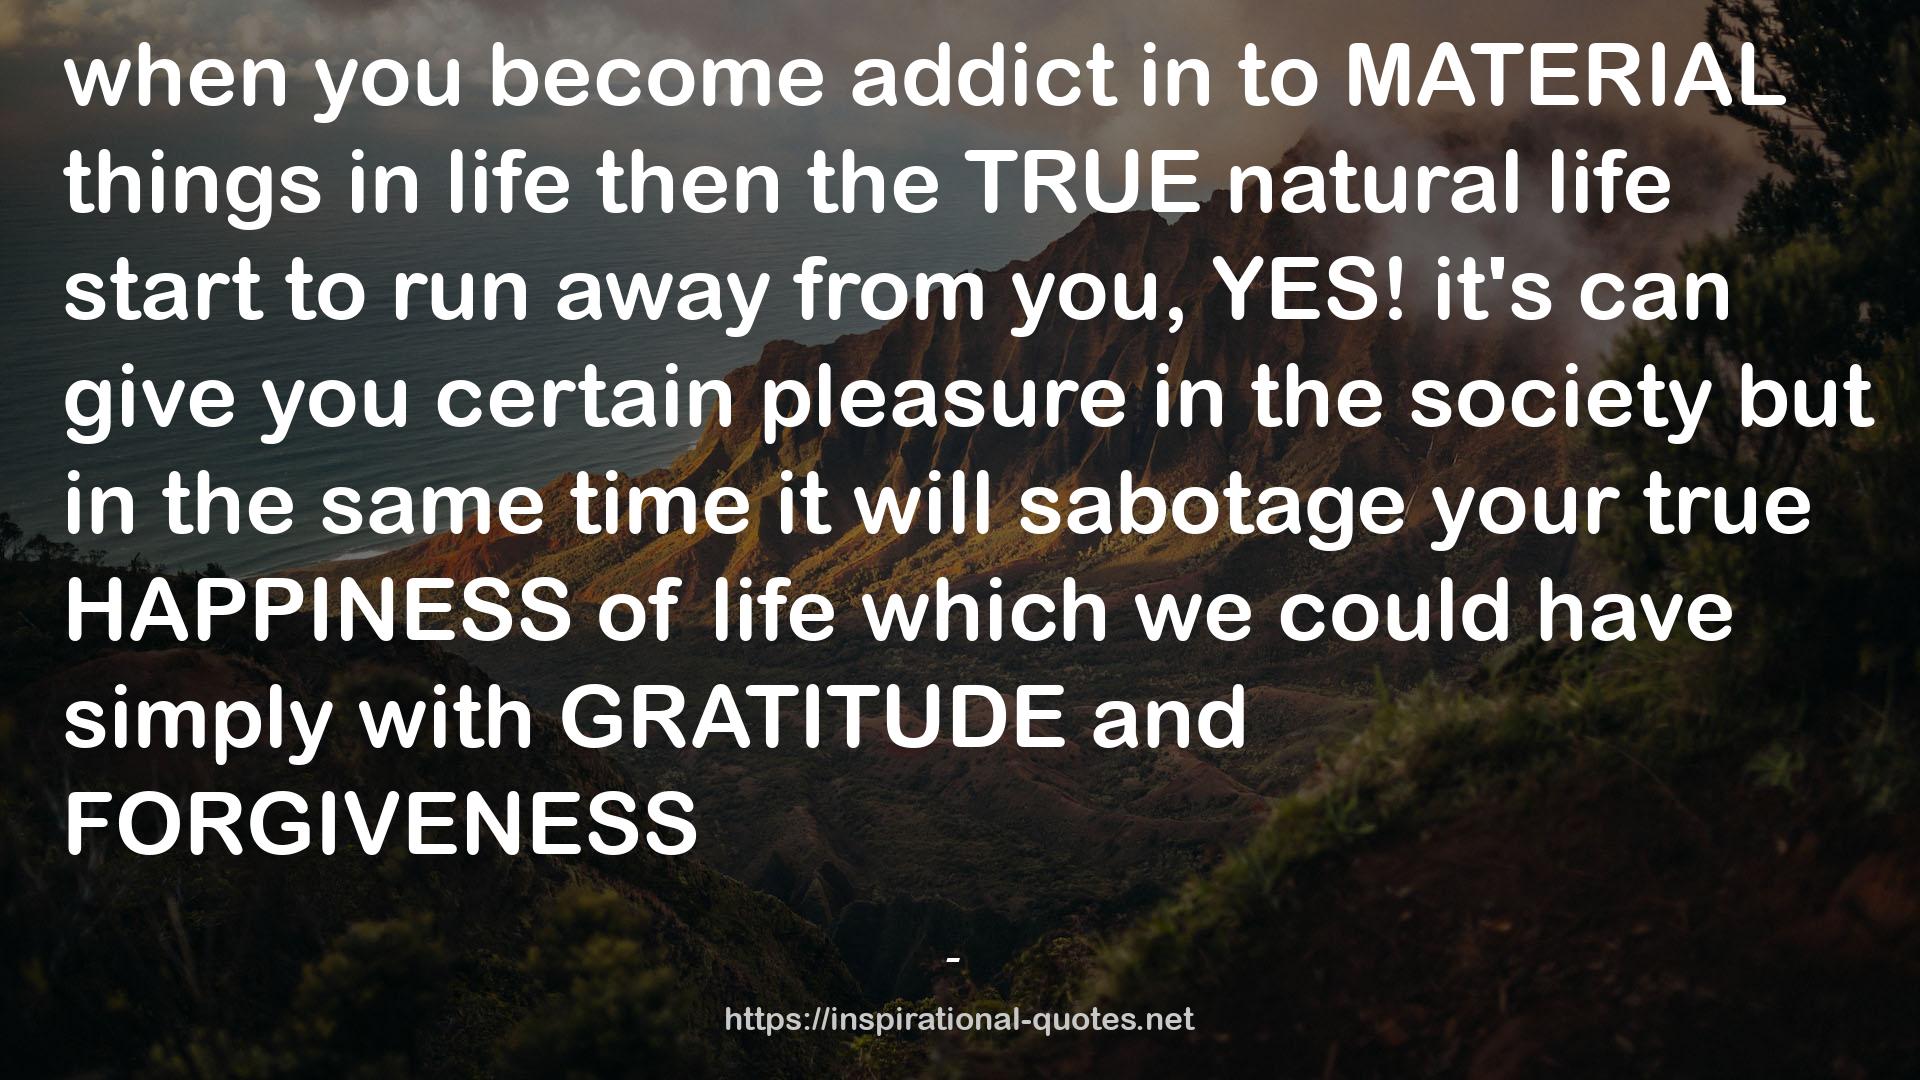 the TRUE natural life  QUOTES